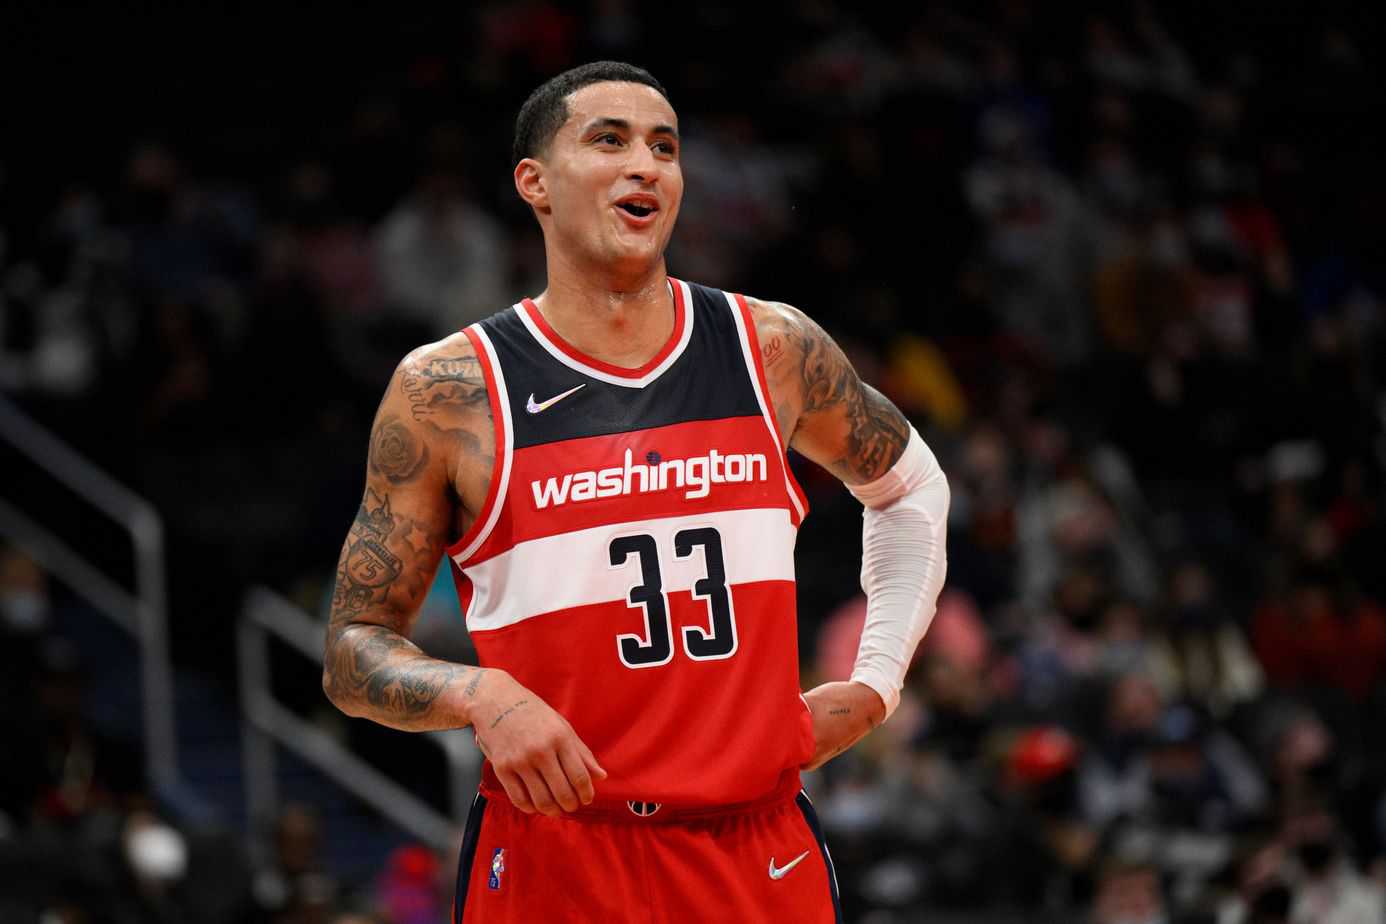 Winnie Harlow went viral after posting a vacation pic with Wizards guard, Kyle Kuzma during their time off for All-Star weekend